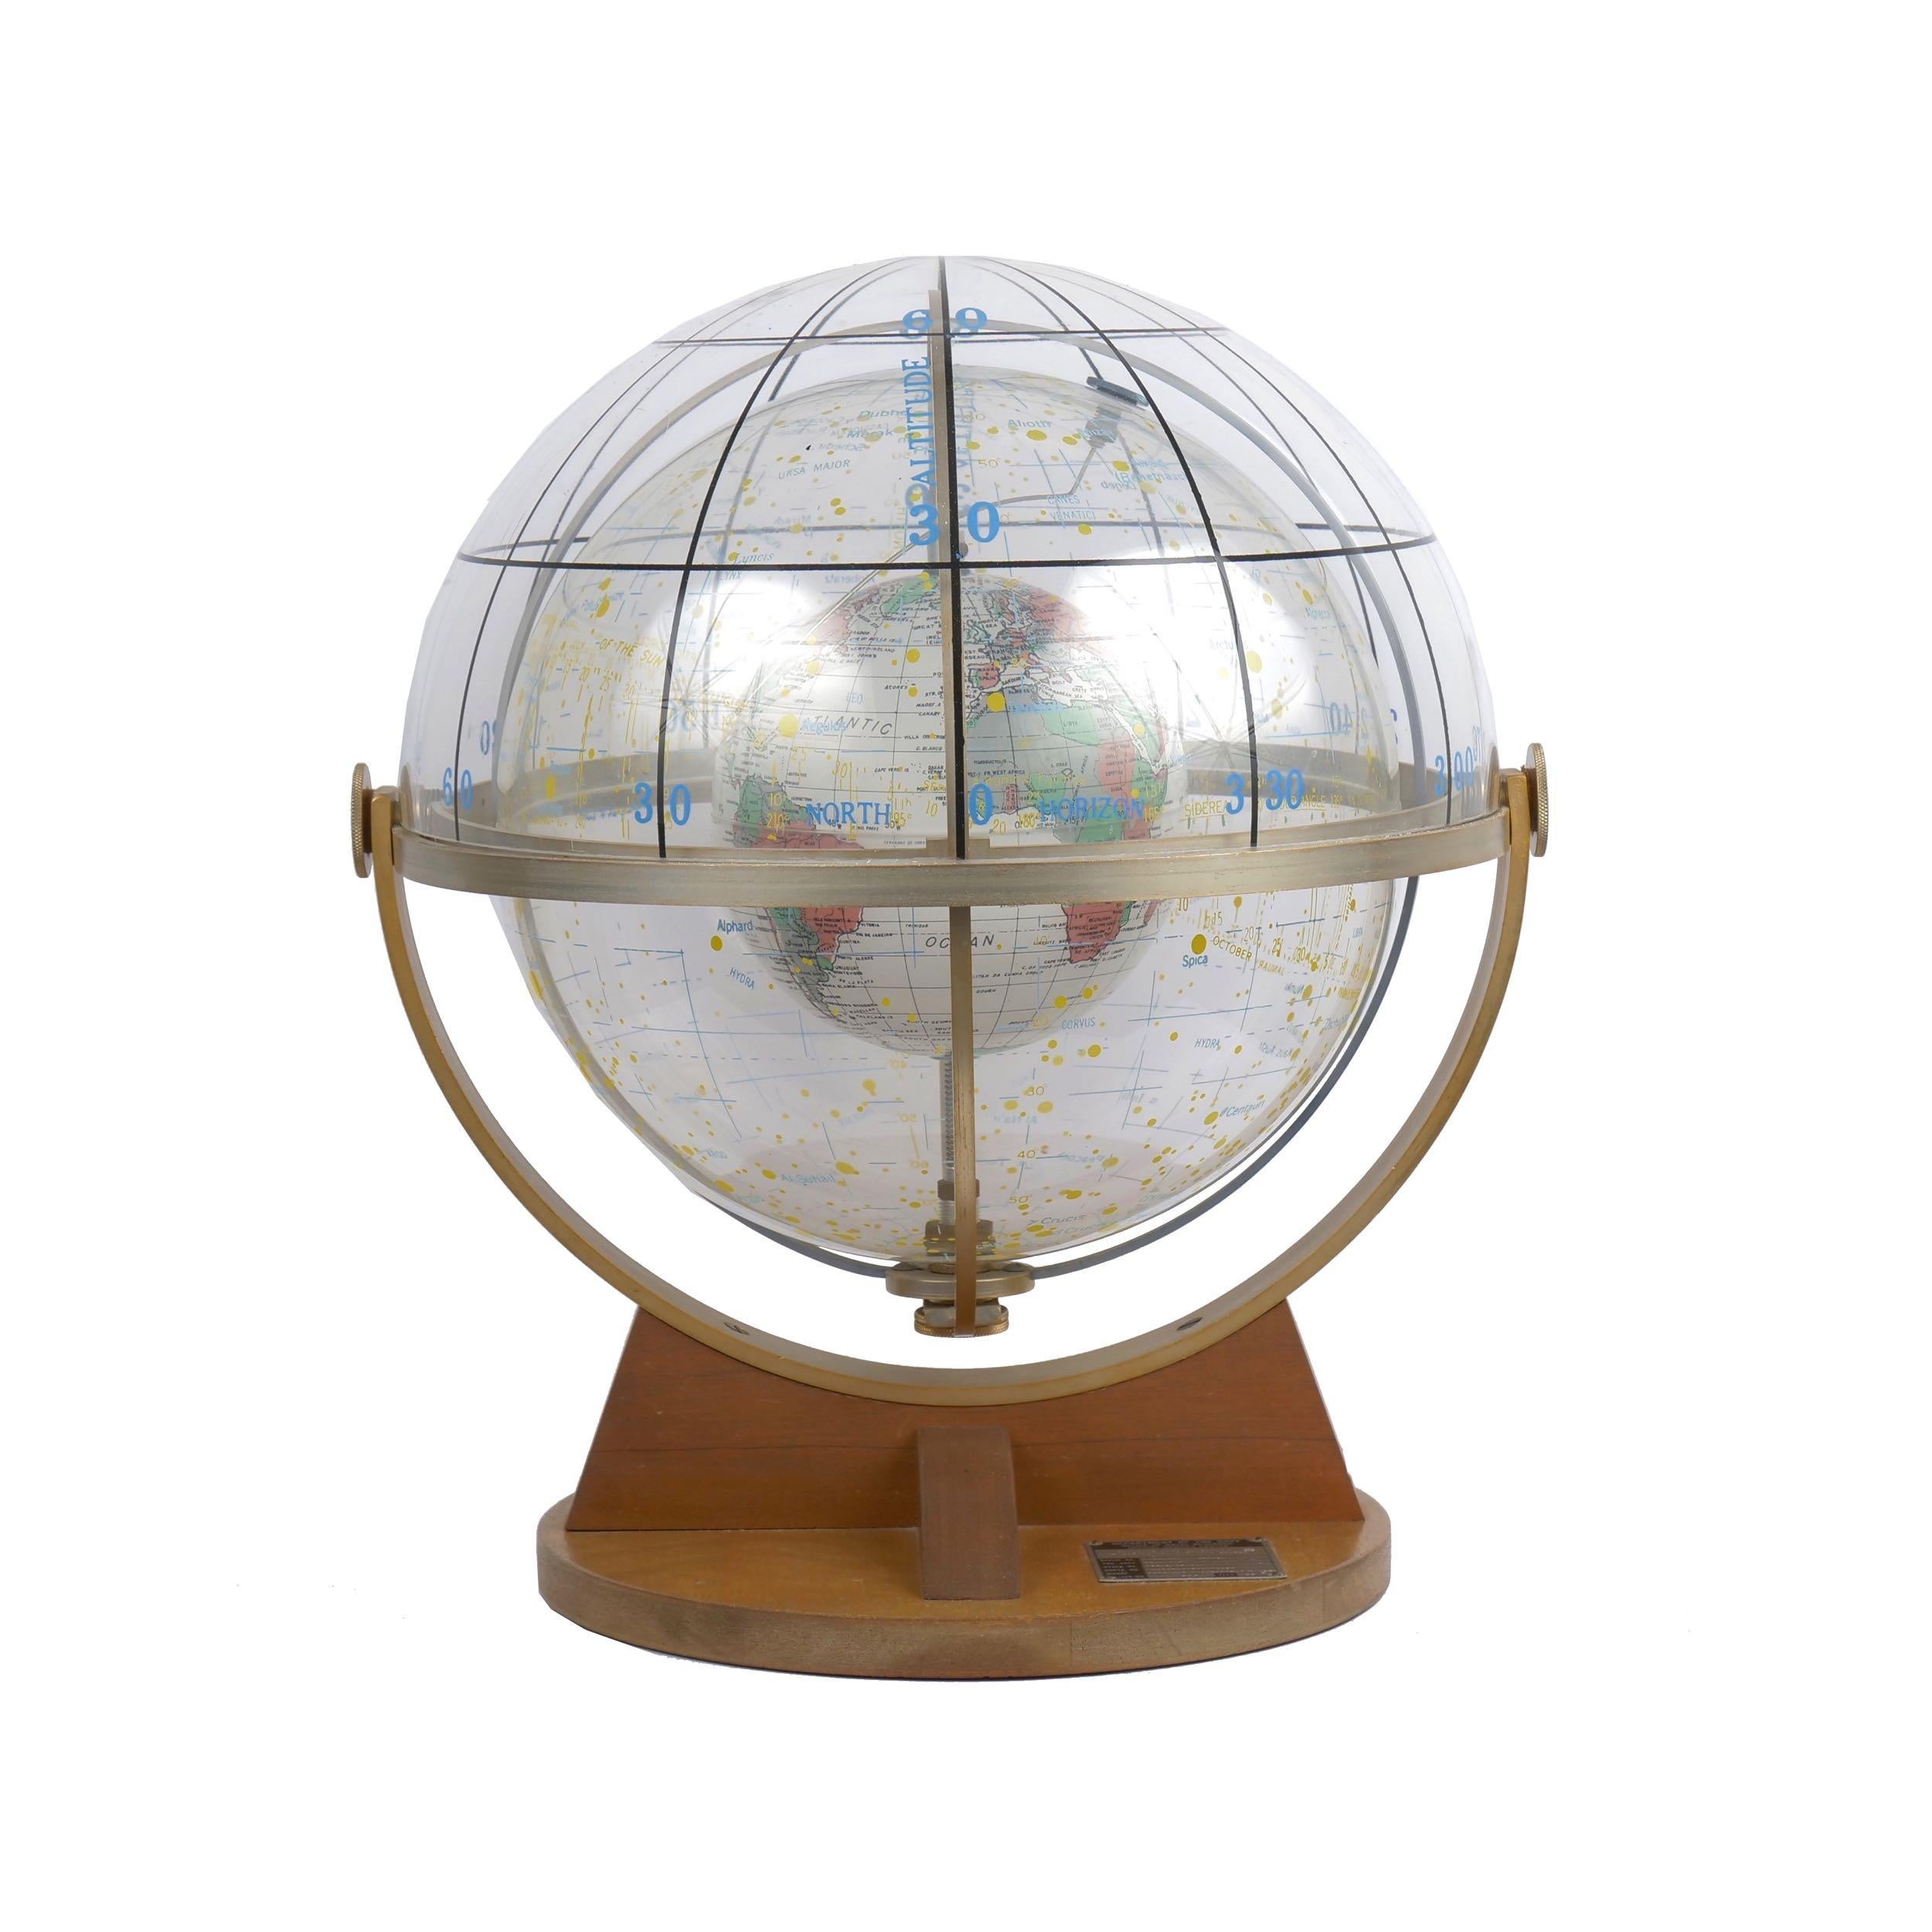 A beautifully preserved celestial armillary sphere developed by Farquhar in Philadelphia for the Department of the Navy, this model was used for classroom instruction during the 1950s and 1960s. The present model was produced in 1953 and retains its